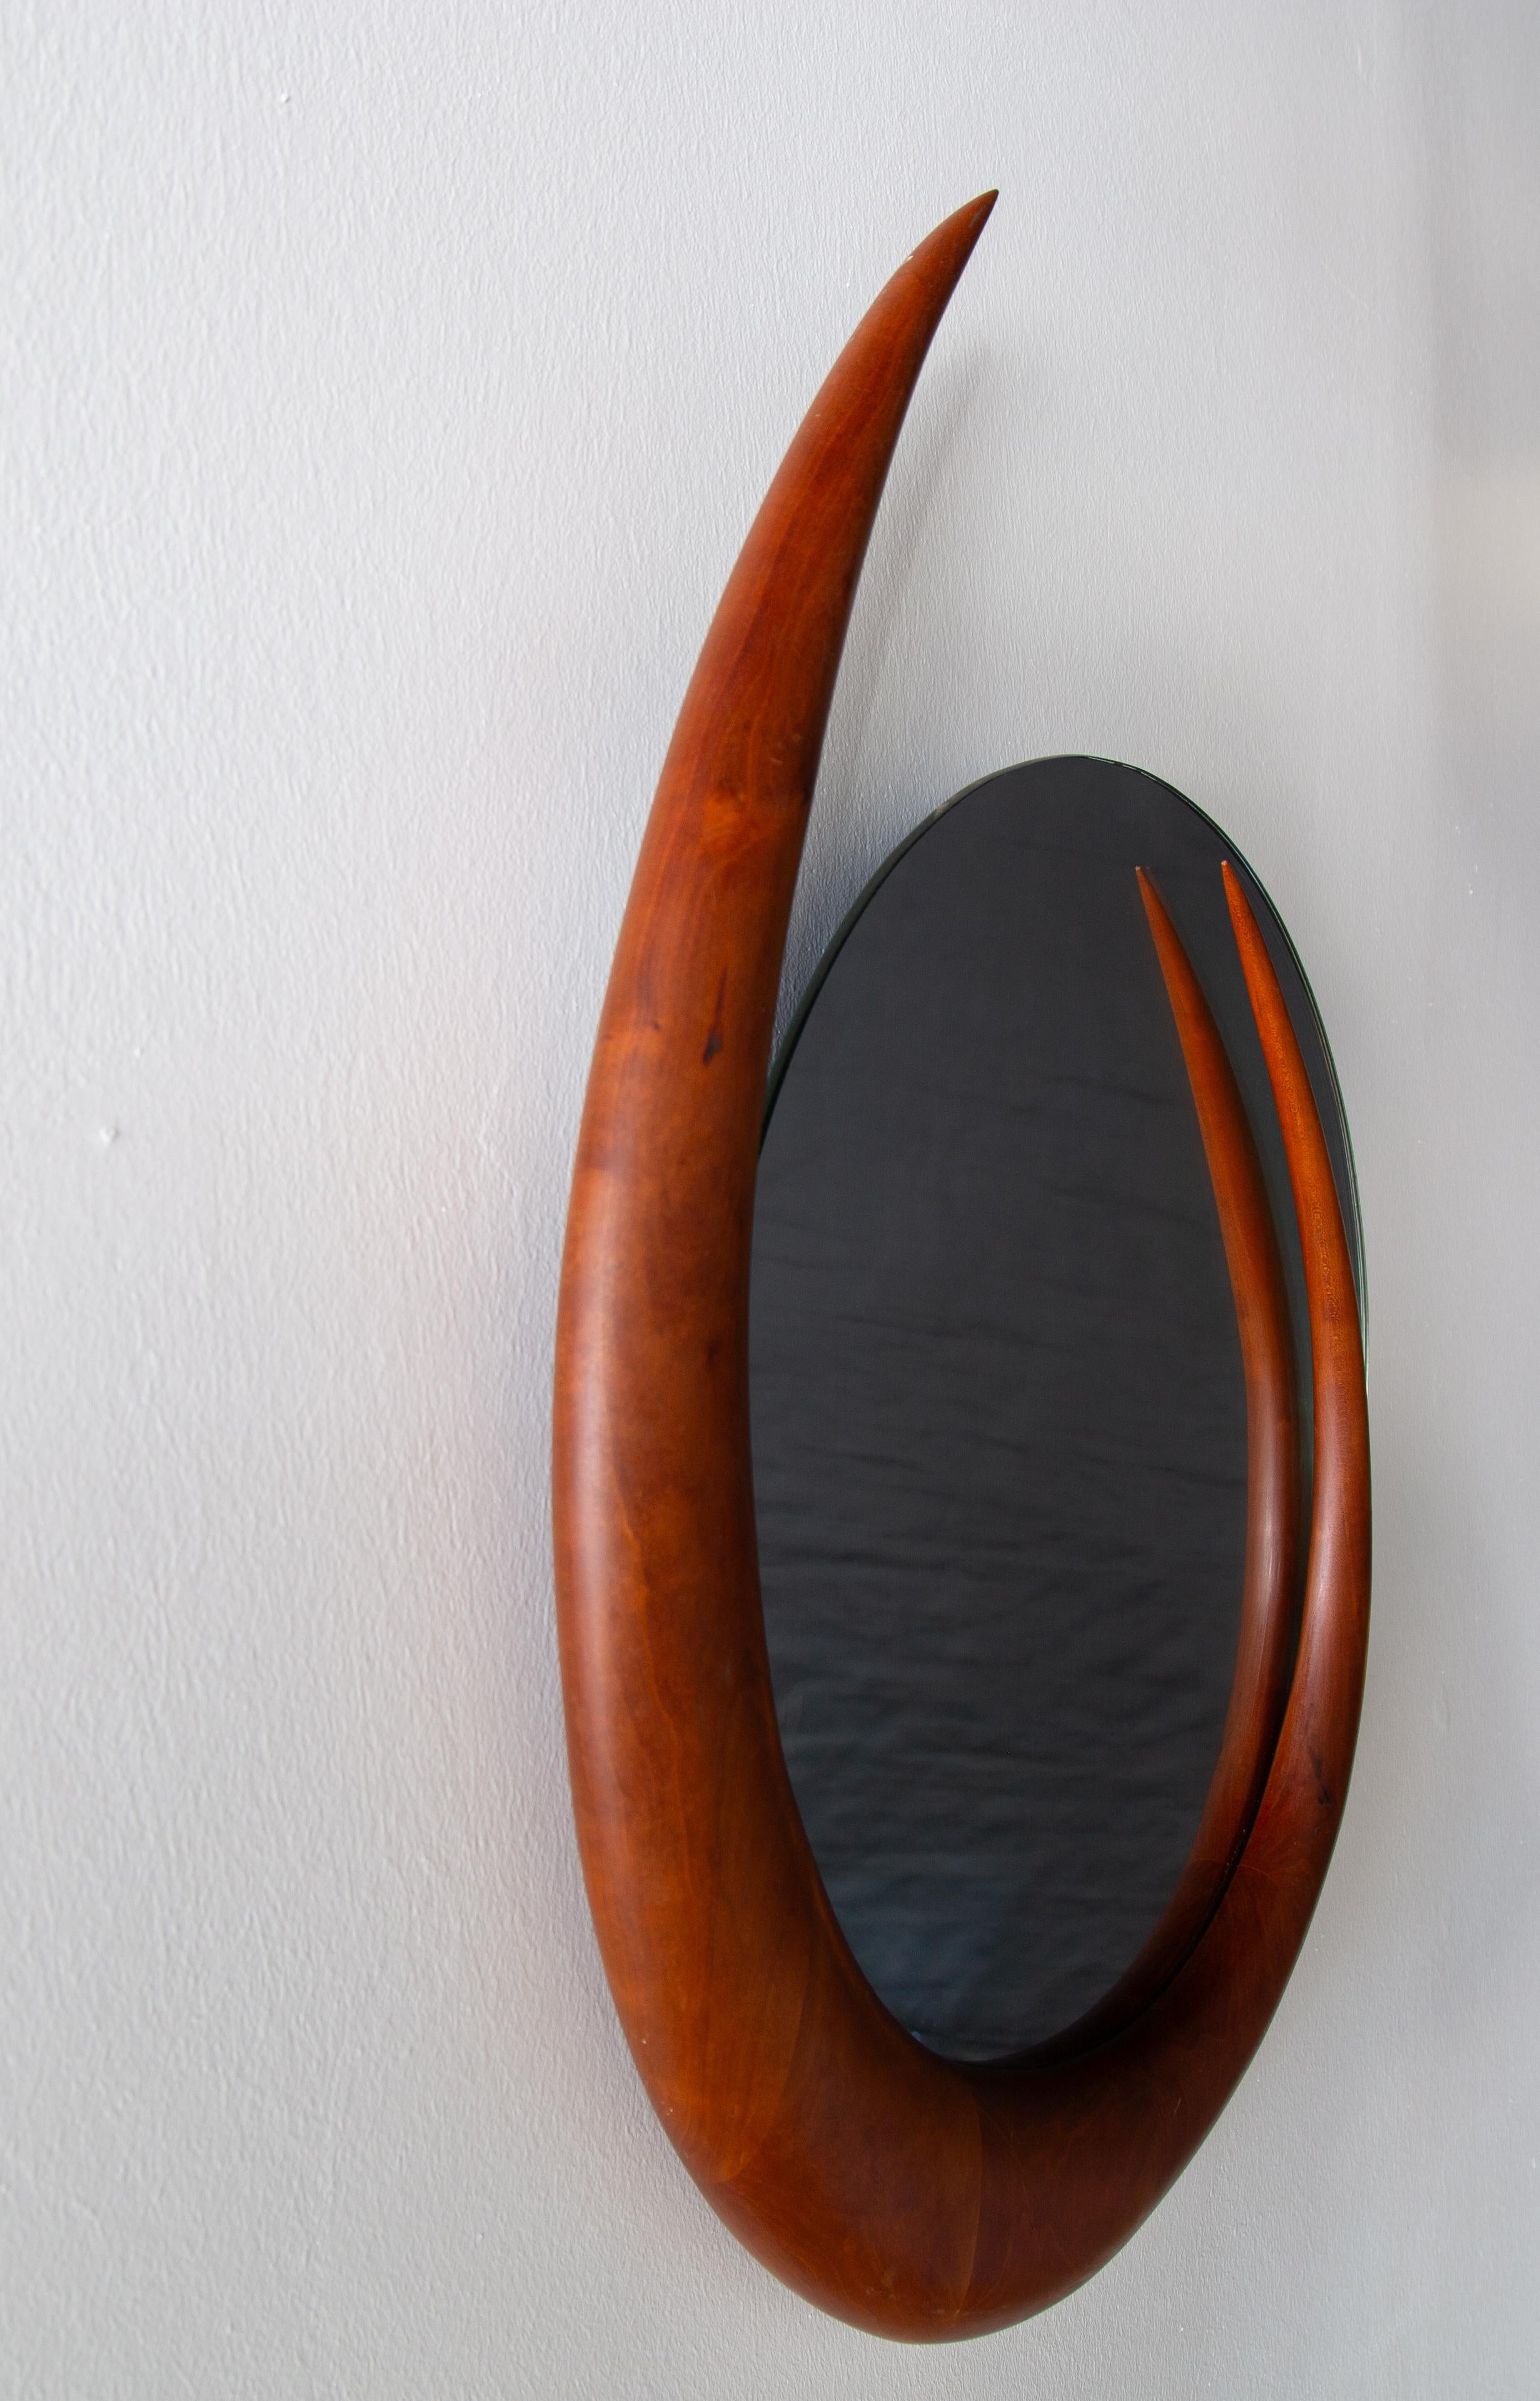 Mid-Century Modern Crescent Mirror in Sculpted Walnut by Kellams 1992 Studio Craft Wendell Castle For Sale